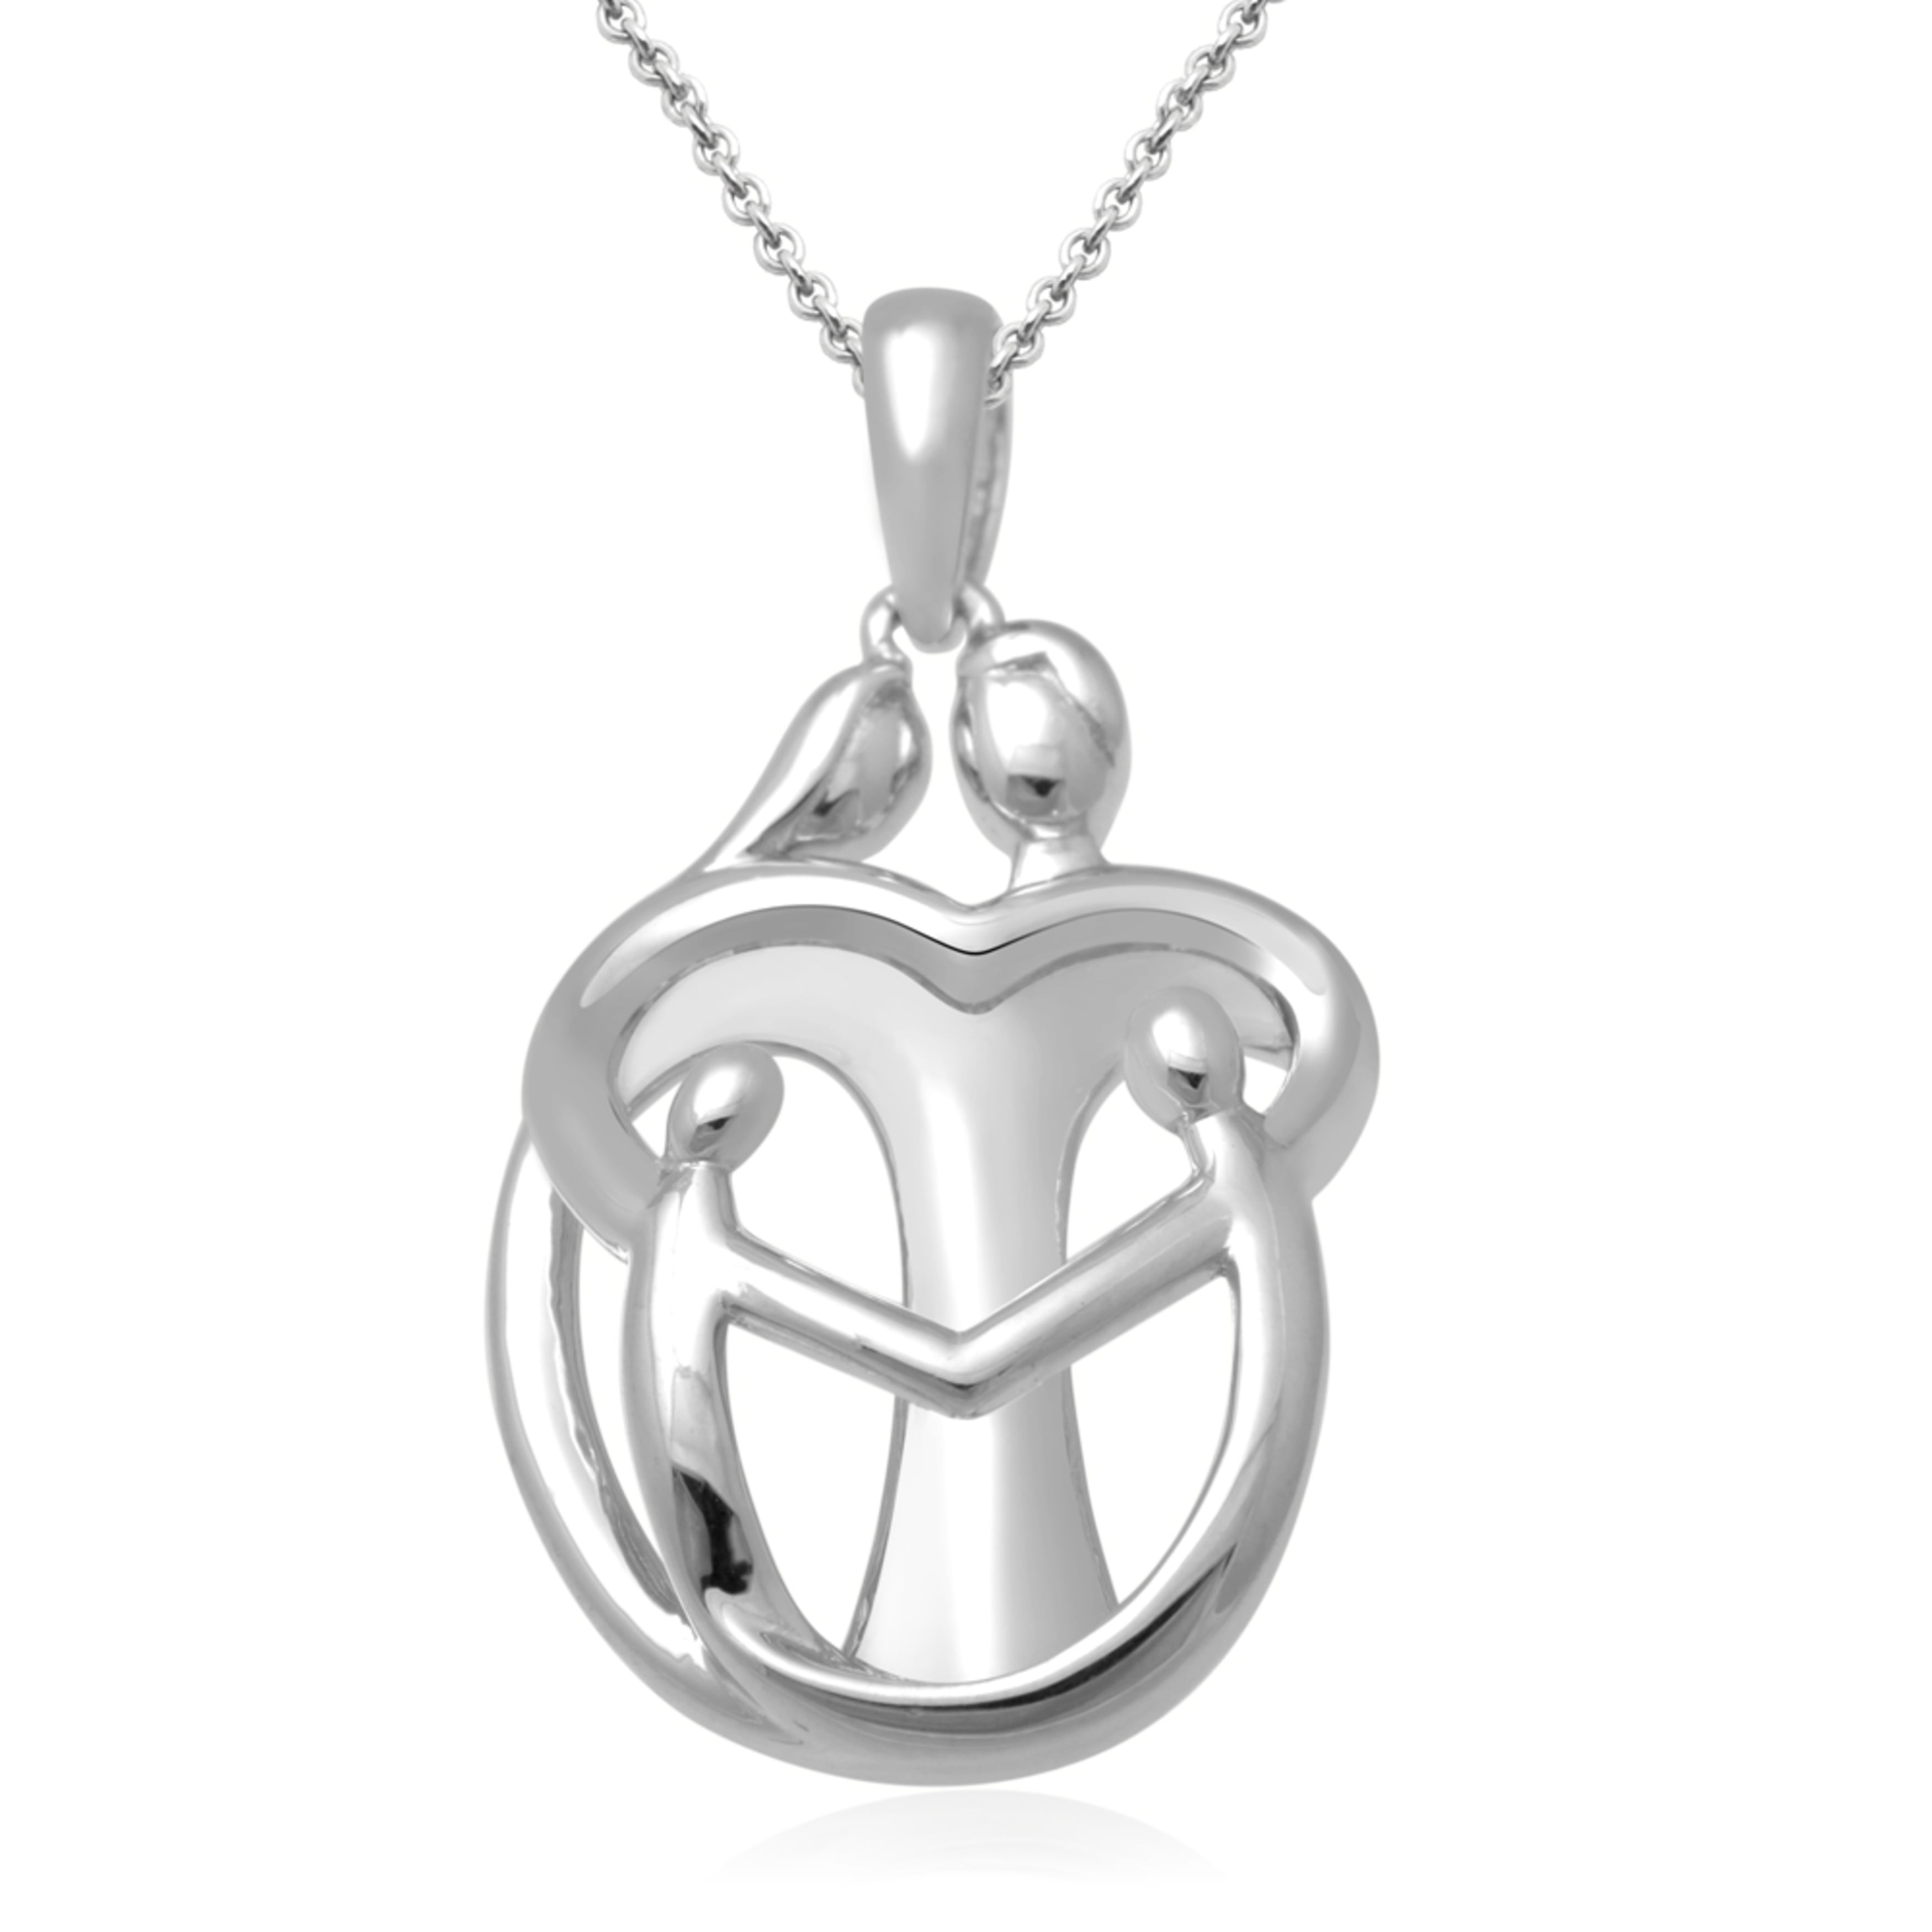 Details about   Heart Pendant in Sterling Silver with Chain 